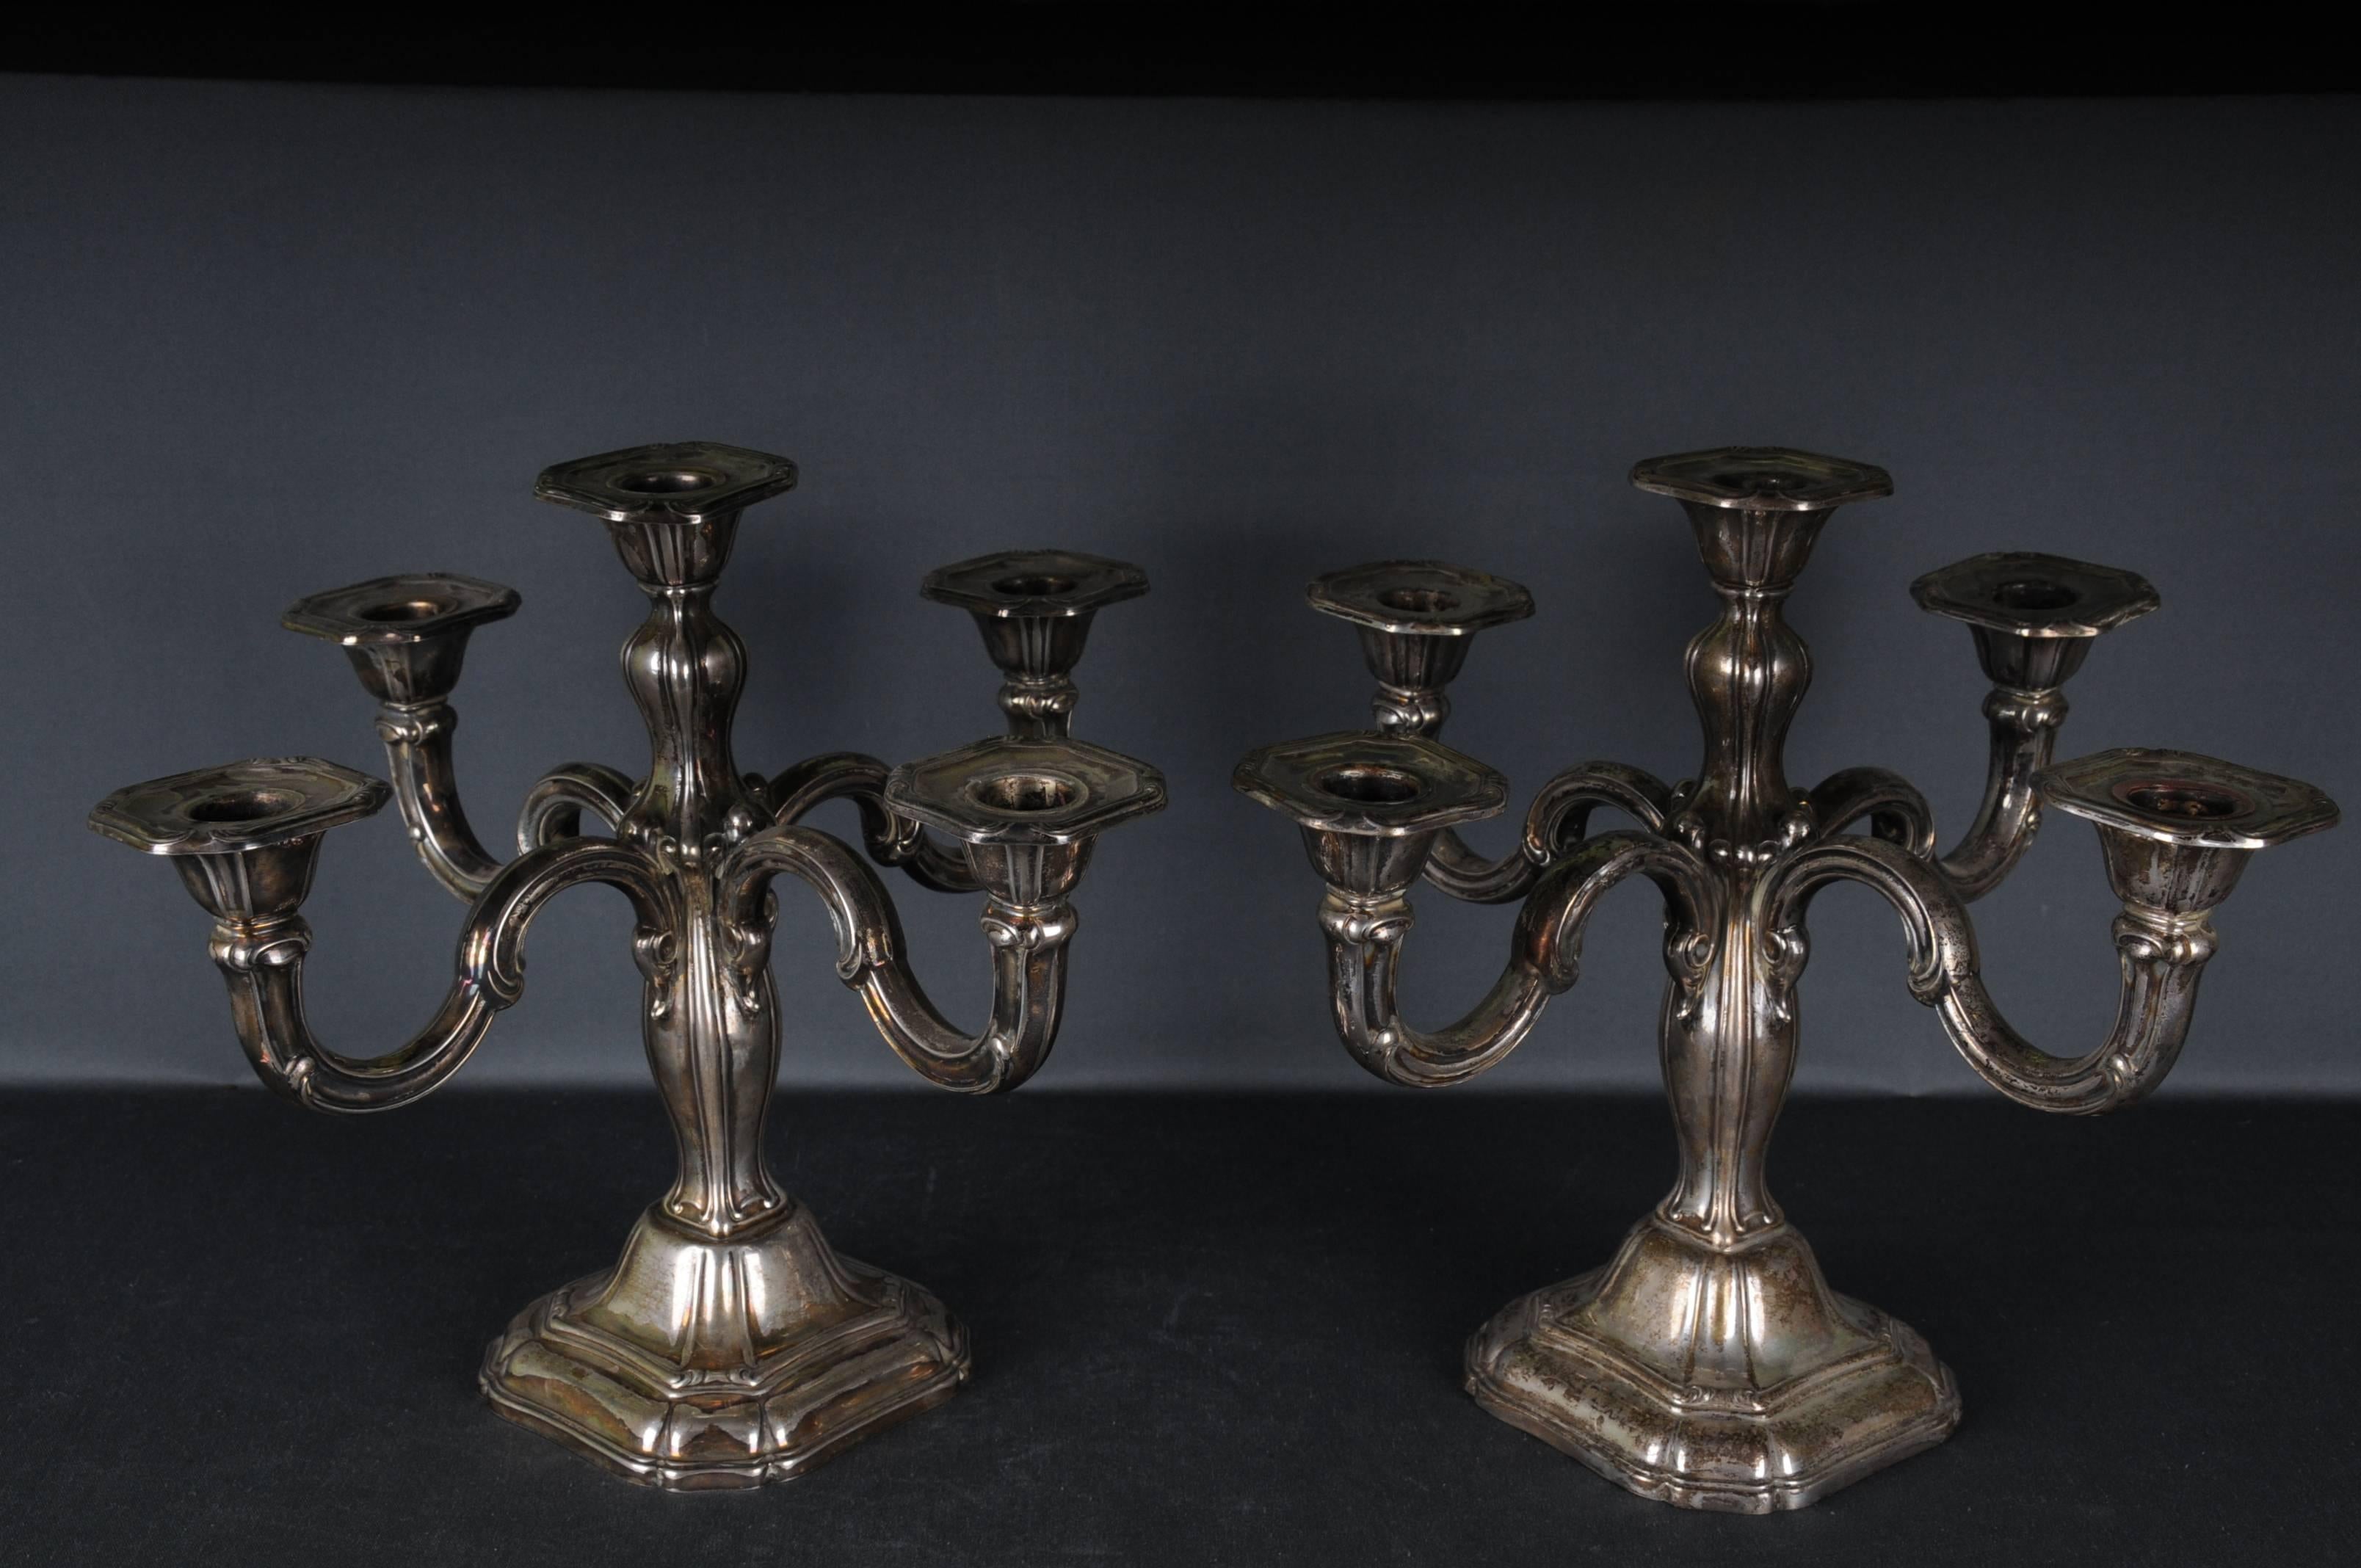 2 High-Quality Silver Candlesticks 5-armed 830 Germany  For Sale 6